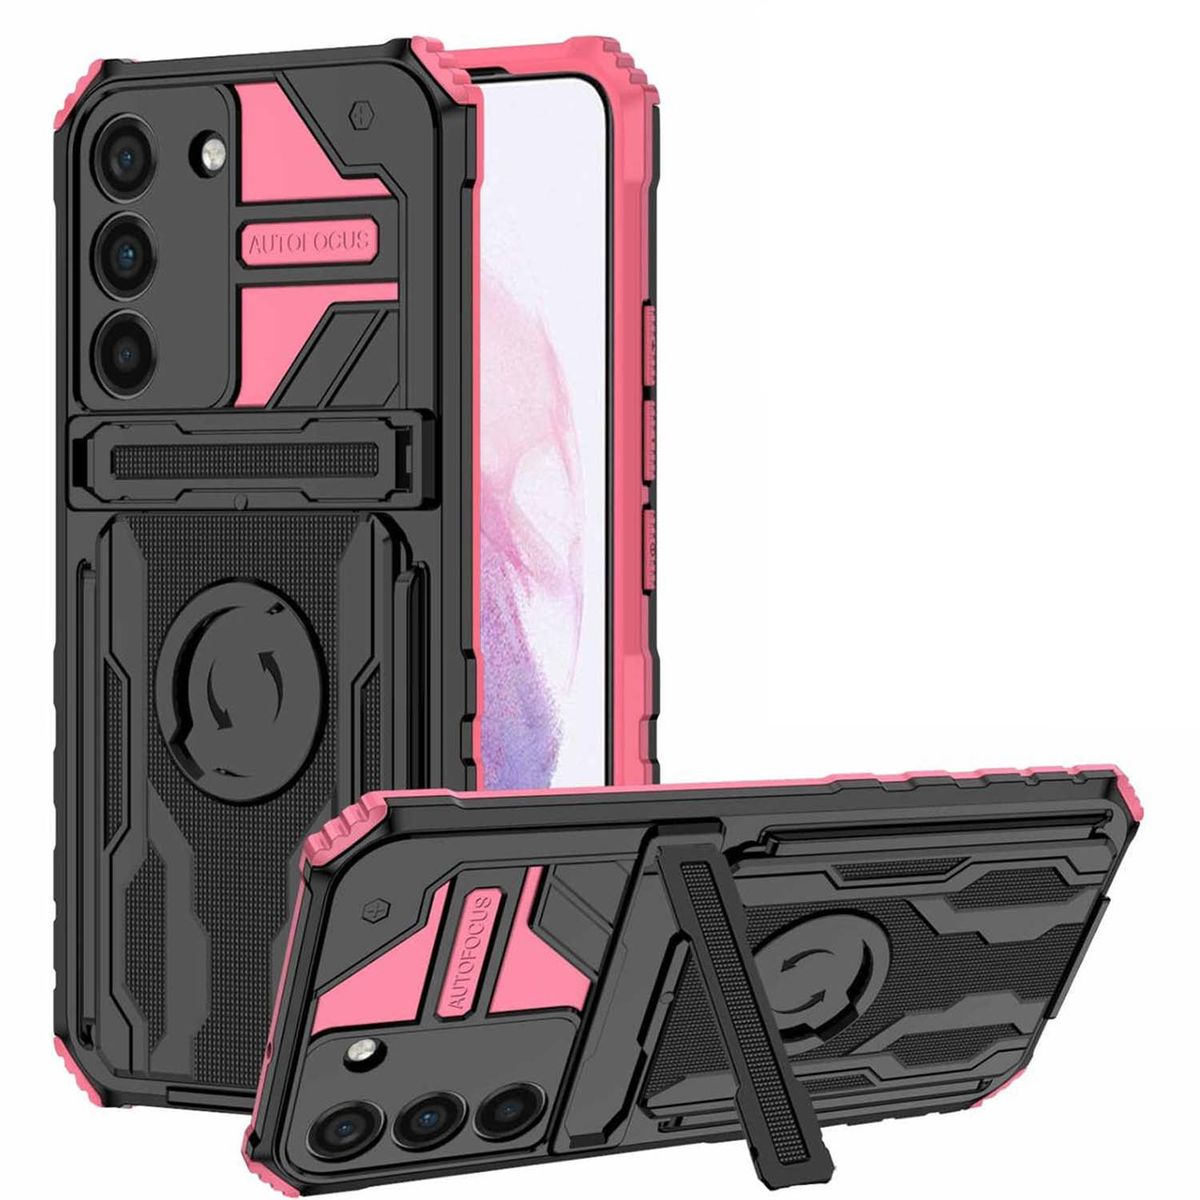 Hülle mit Plus, Shockproof Galaxy Armor Armband, Pink Backcover, WIGENTO S23 Samsung,